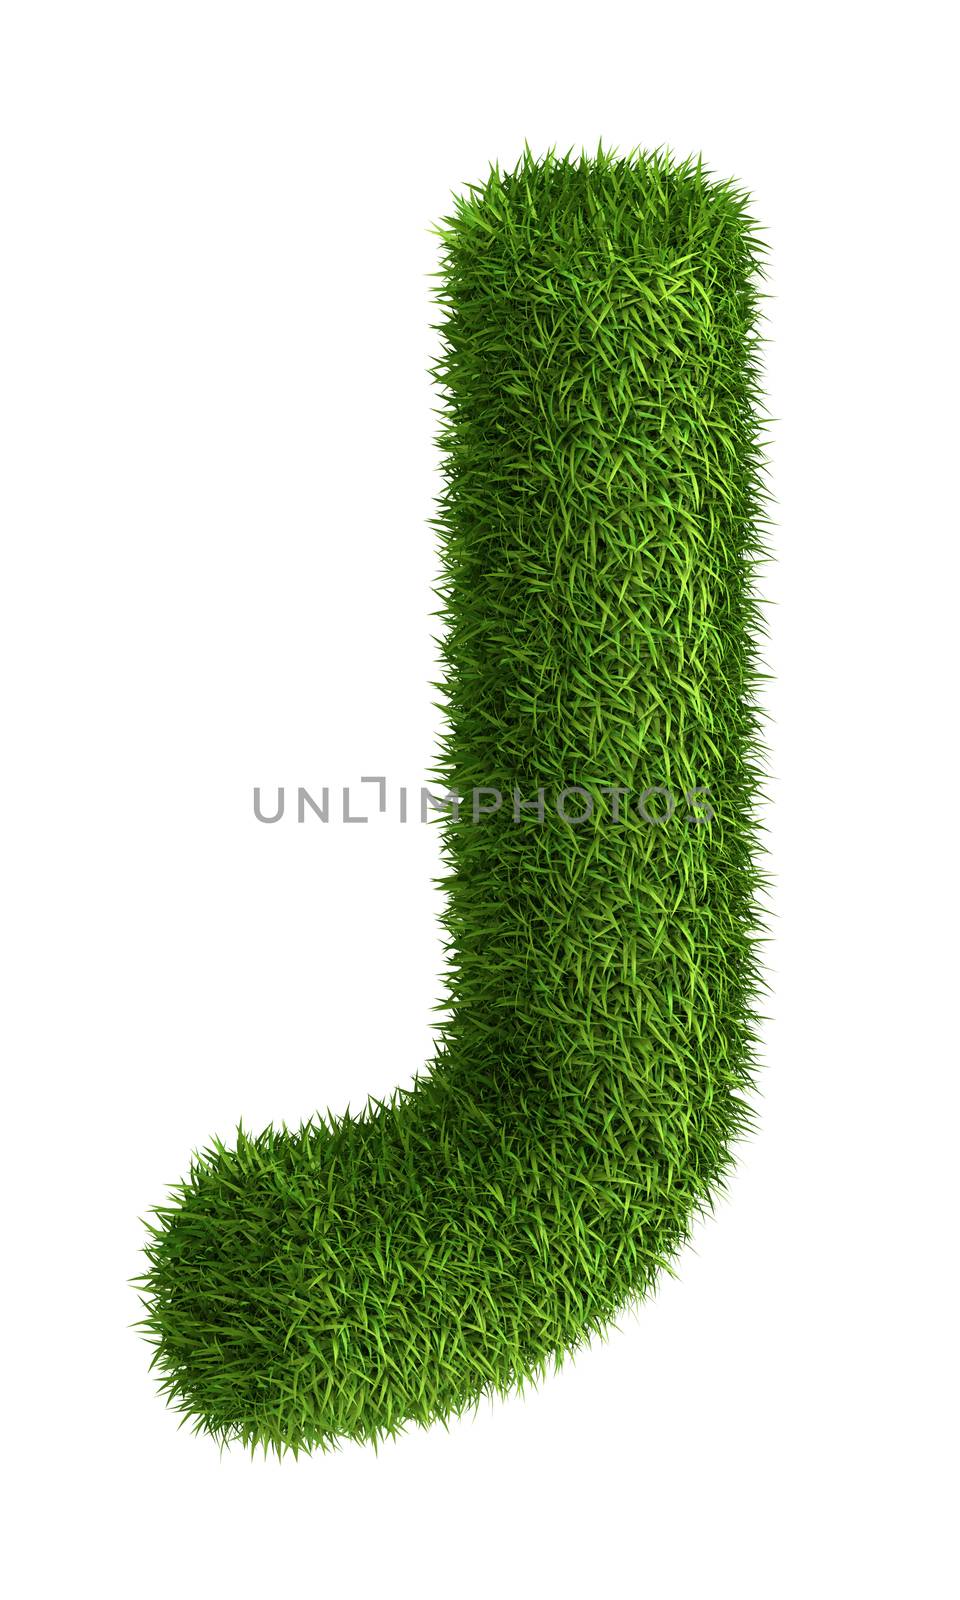 3D Letter J photo realistic isometric projection grass ecology theme on white